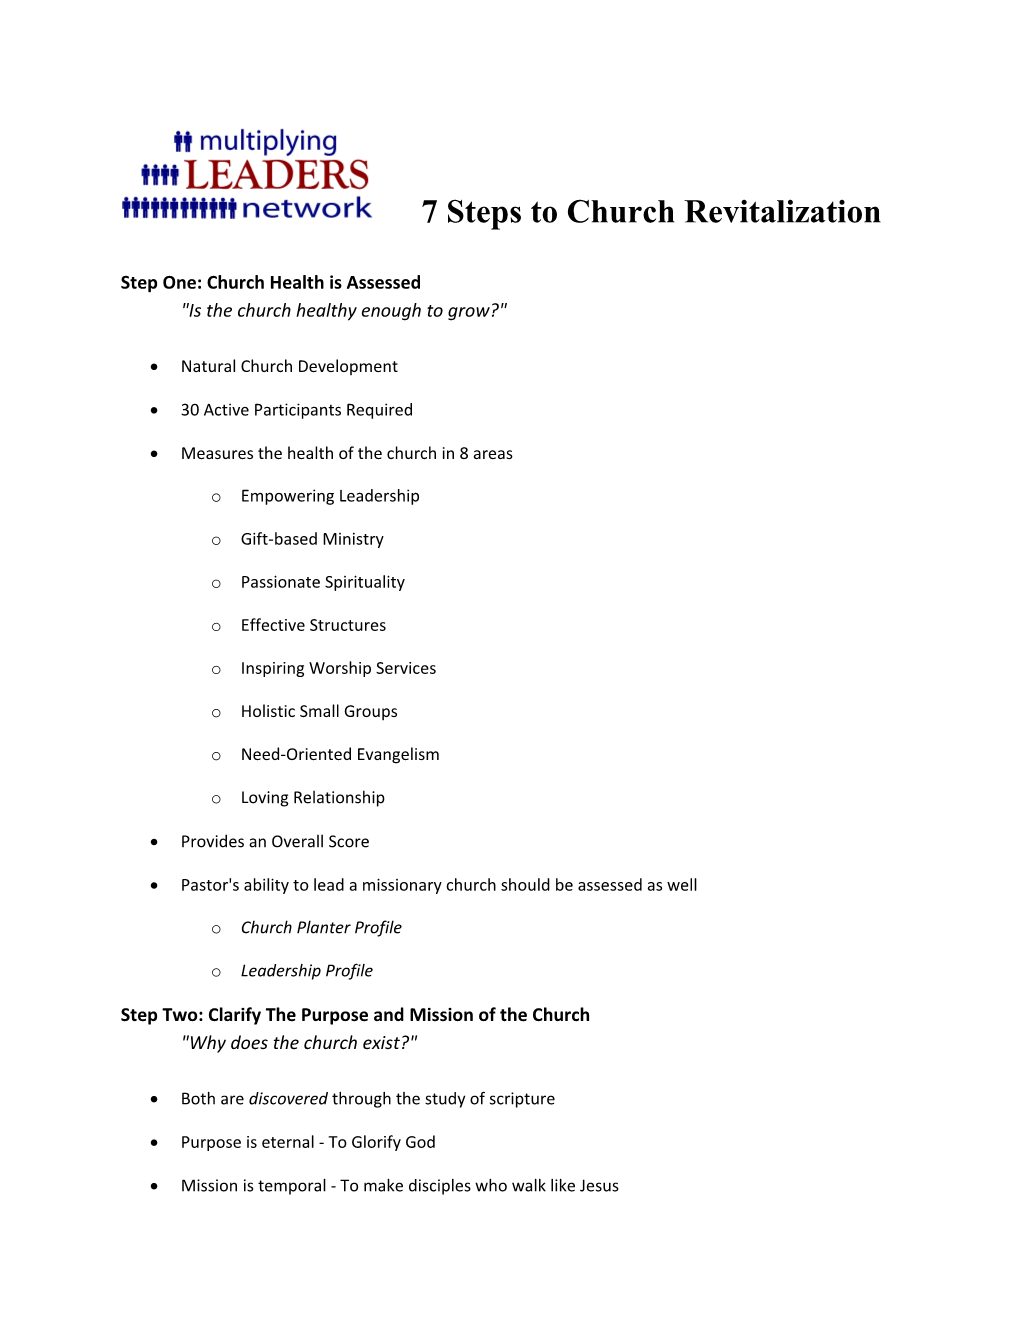 Step One: Church Health Is Assessed